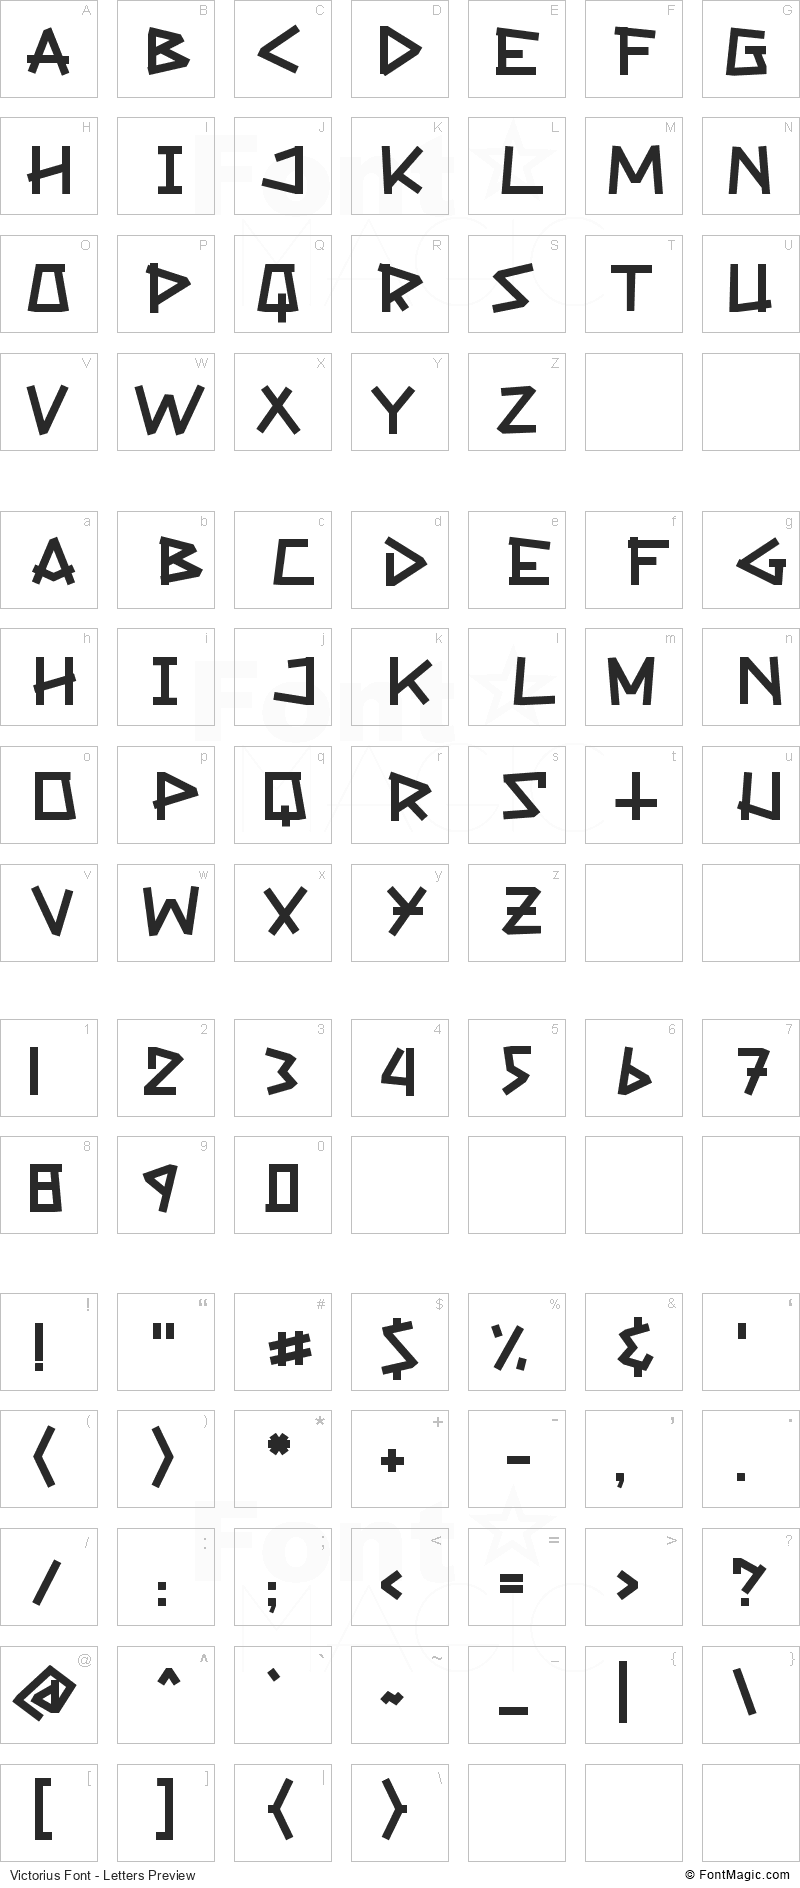 Victorius Font - All Latters Preview Chart